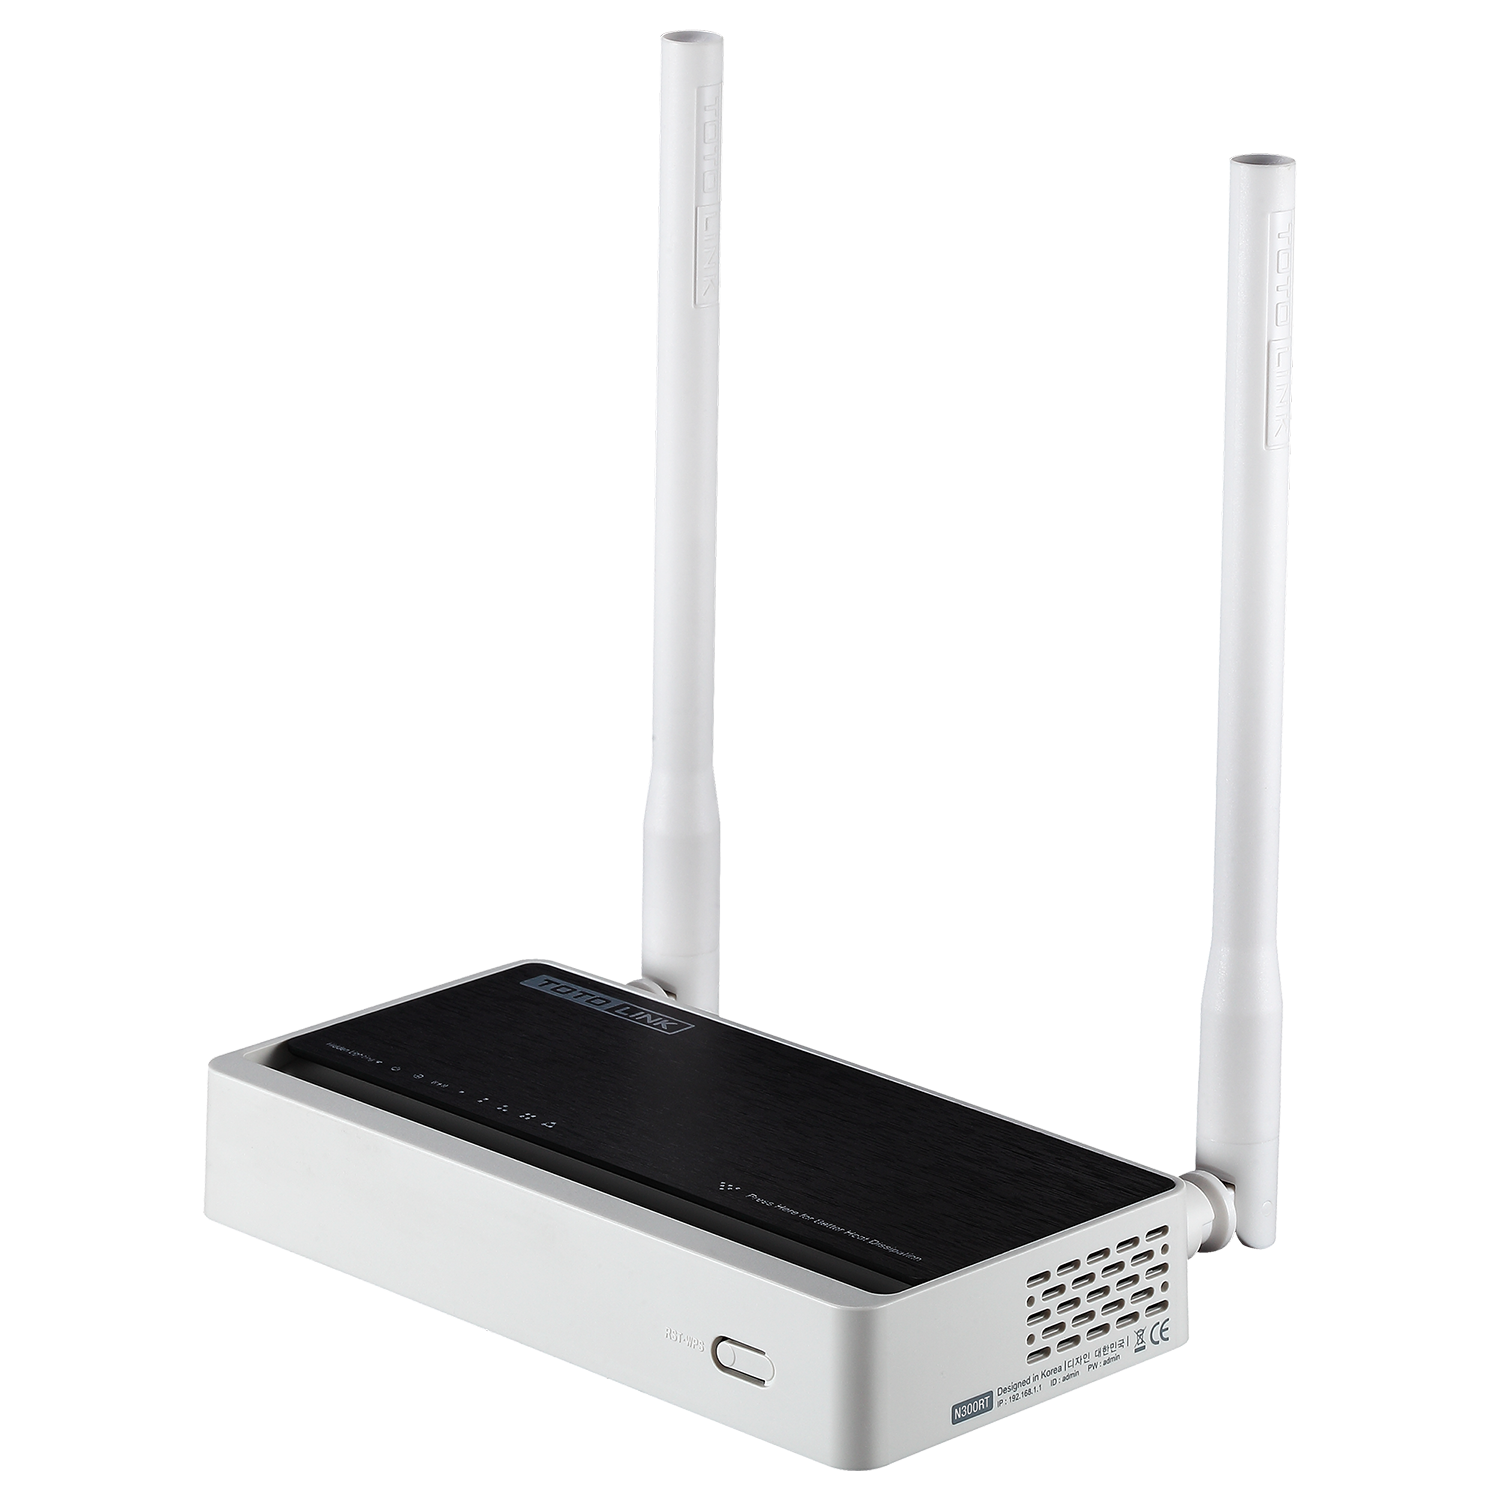 Wi-Fi router Totolink N300RT